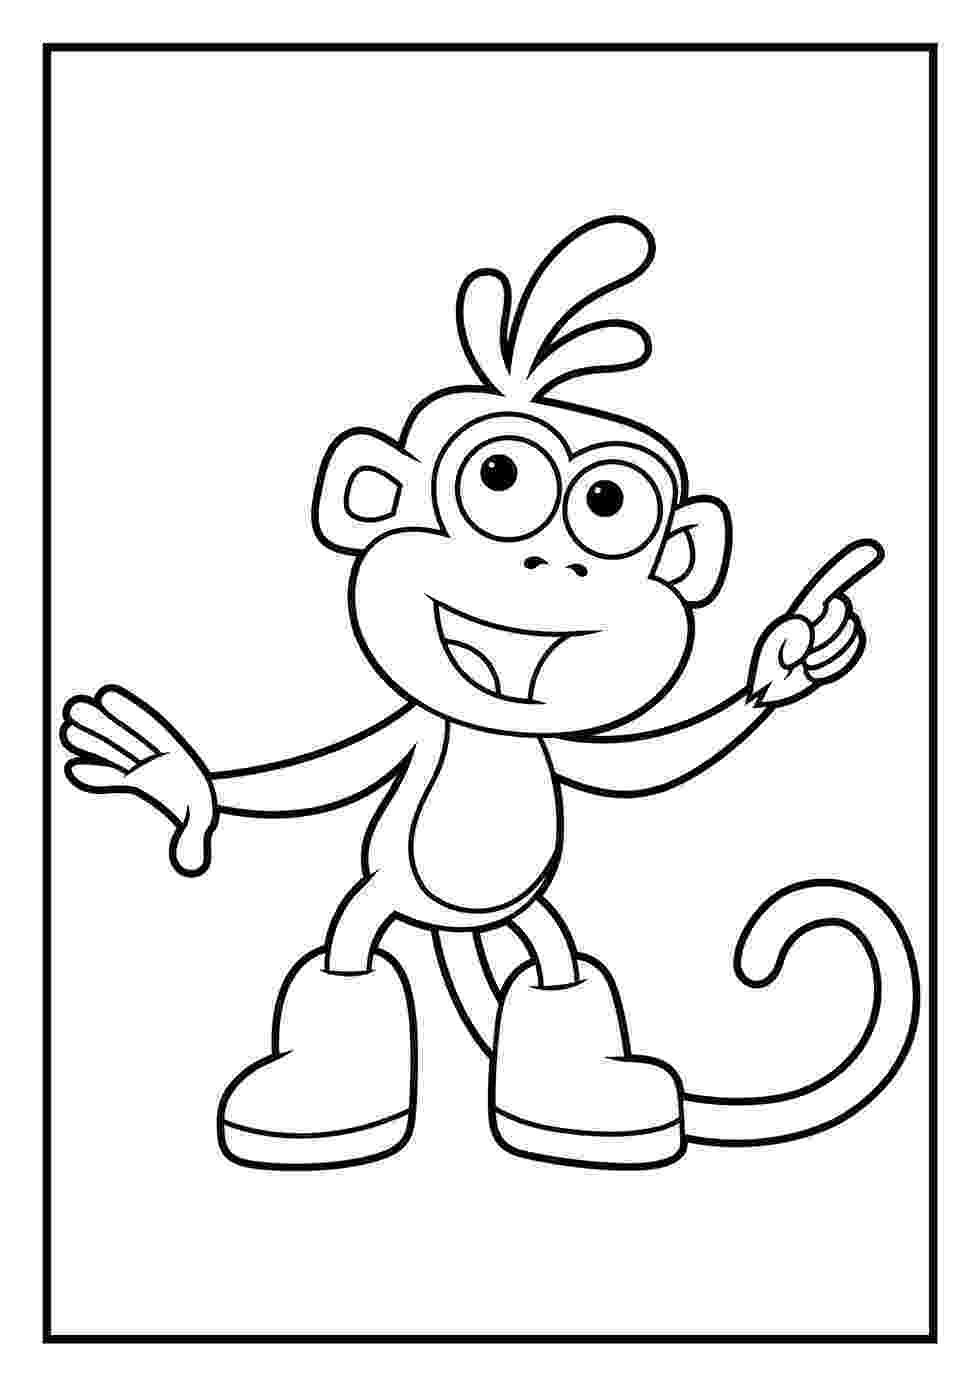 dora colouring page dora coloring pages diego coloring pages colouring page dora 